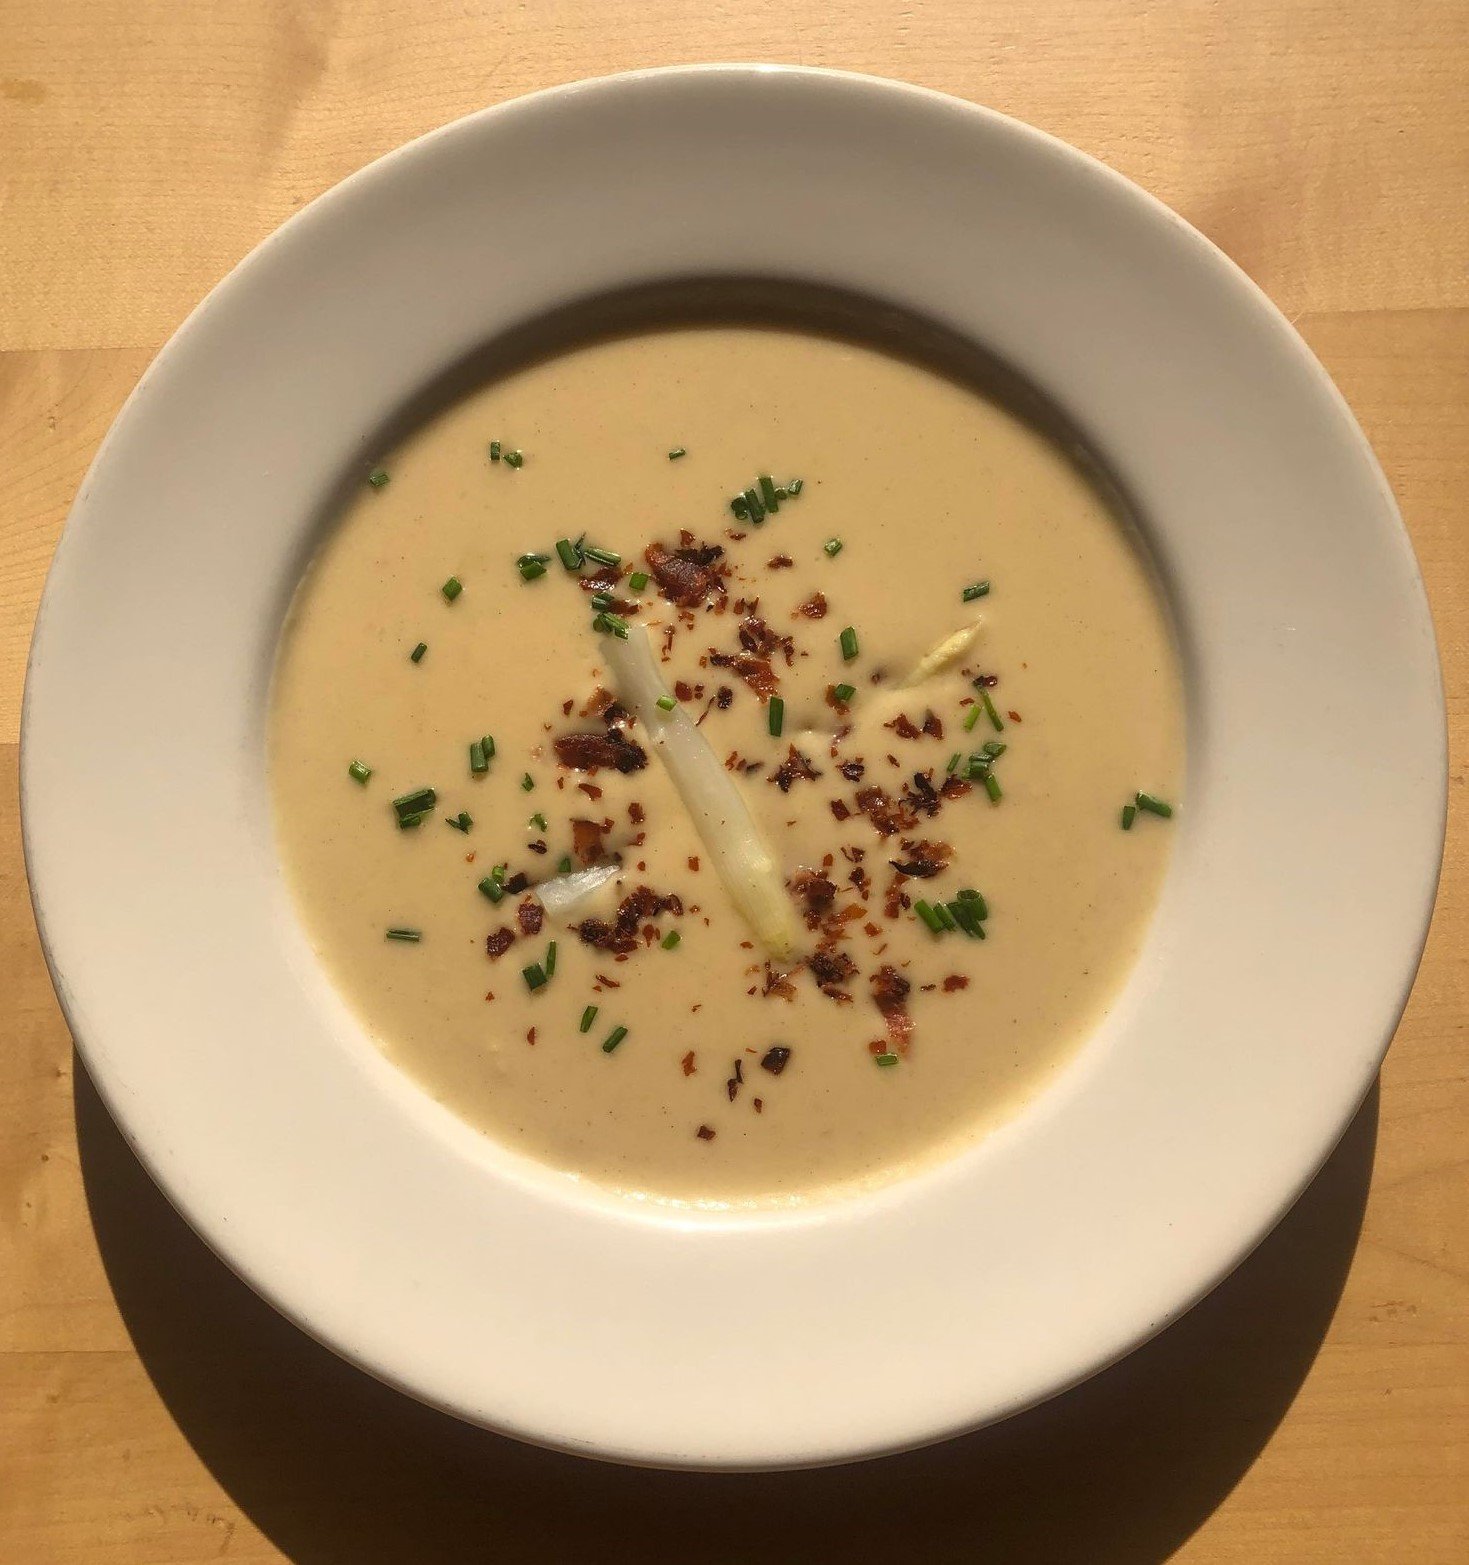 Hollerbach's 𝐒𝐩𝐚𝐫𝐠𝐞𝐥𝐜𝐫𝐞́𝐦𝐞𝐬𝐮𝐩𝐩𝐞 (Cream of White Asparagus Soup), made with seasonal fresh white asparagus, will be available Saturday and Sunday May 25-26 at Hollerbach's German Restaurant!! Mmmmm, lecker! #spargel #whiteasparagus #s